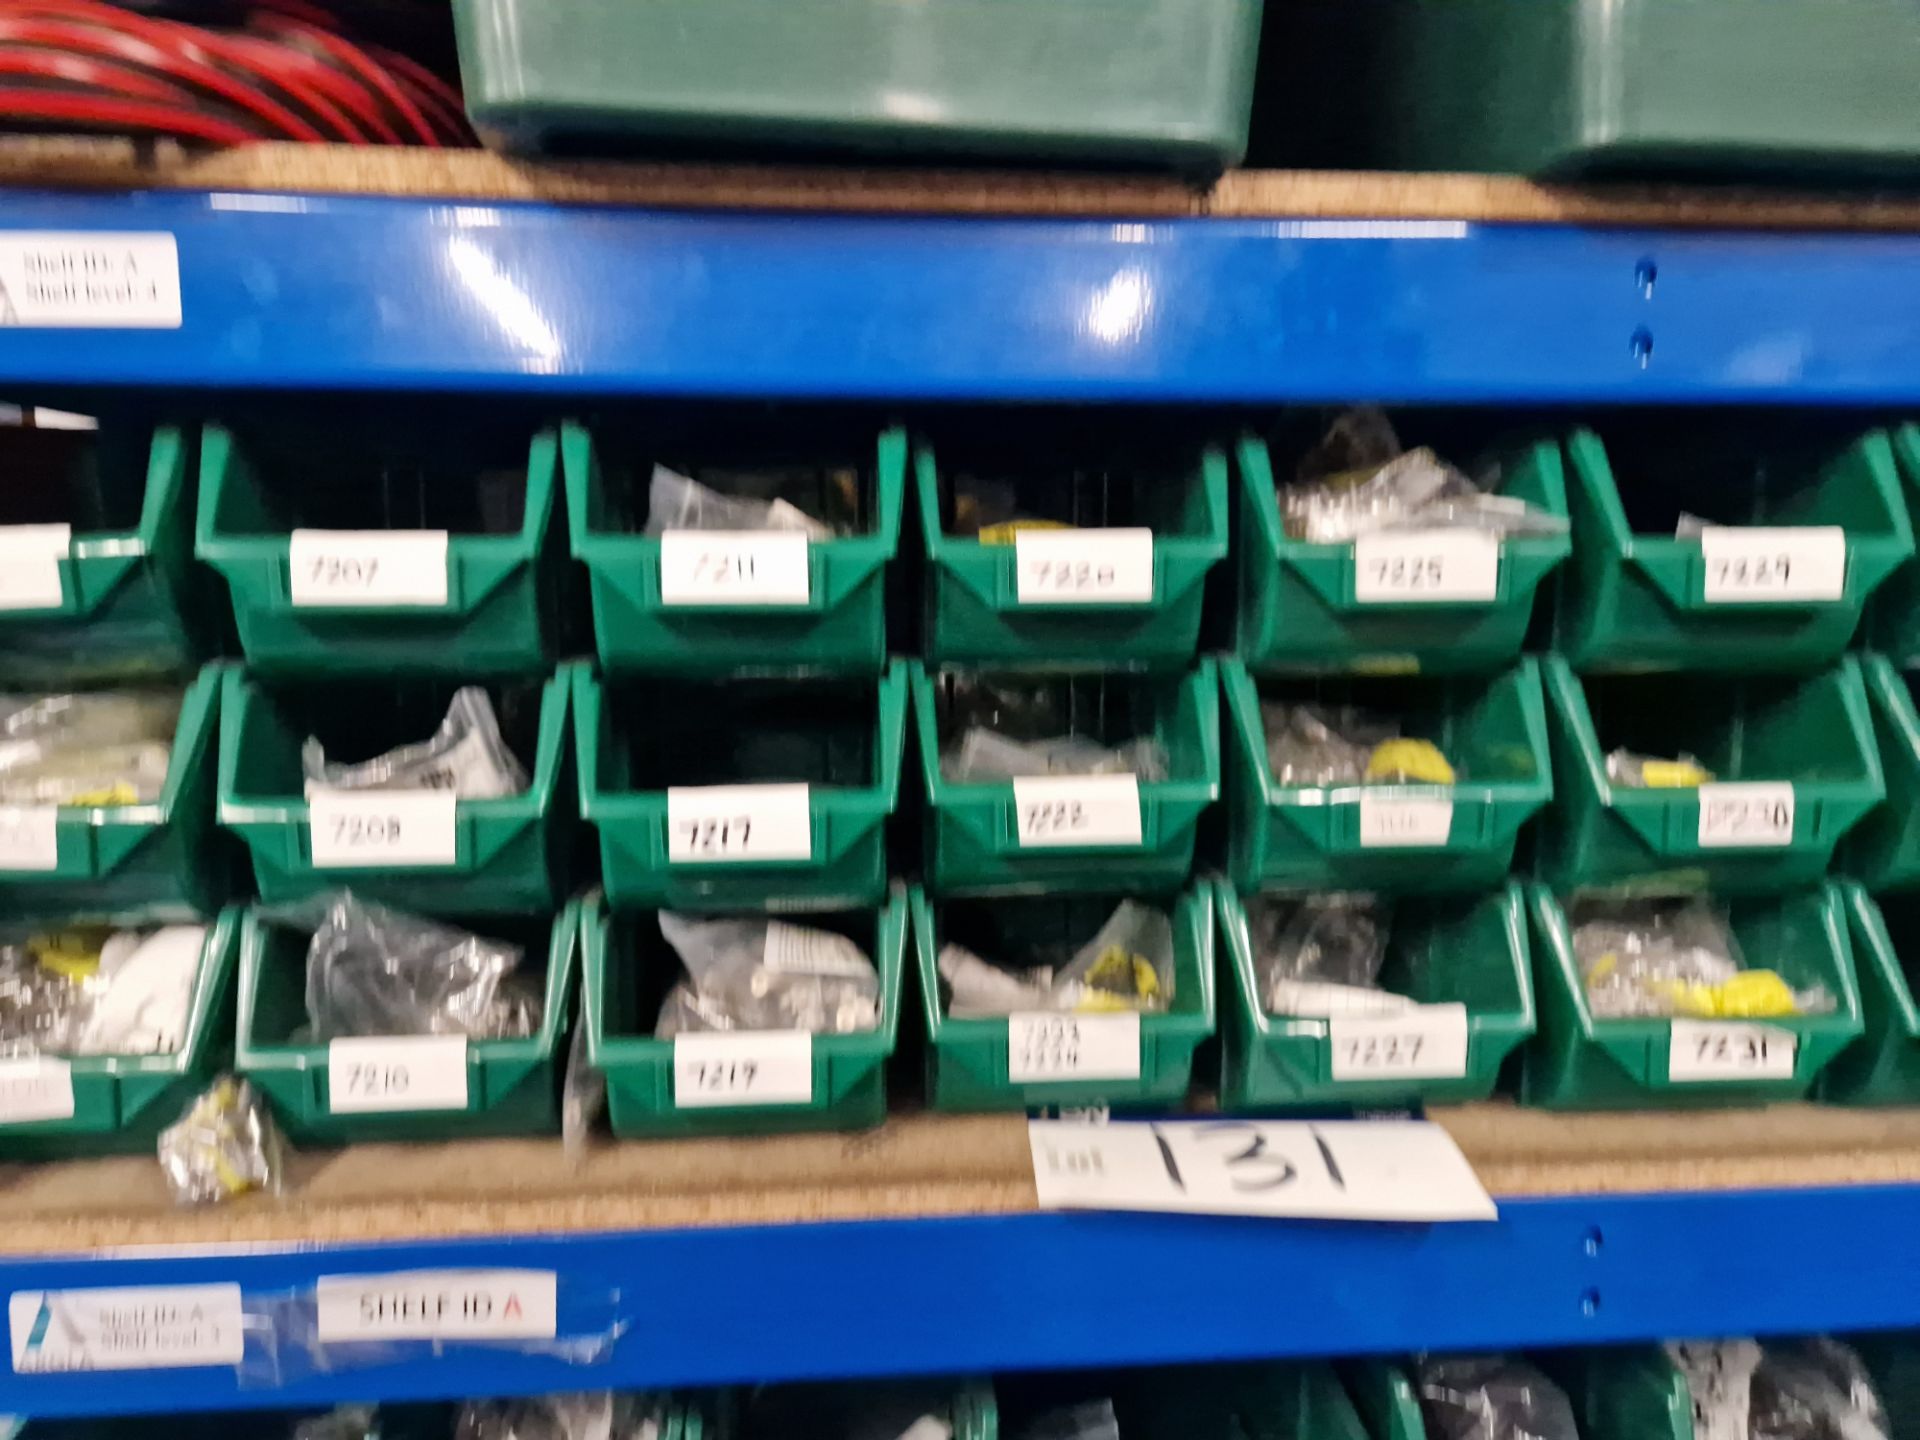 Contents to One Bay of Shelving, including Rubber Gaskets, Aluminium Profile, End Caps, Screws, - Image 3 of 6